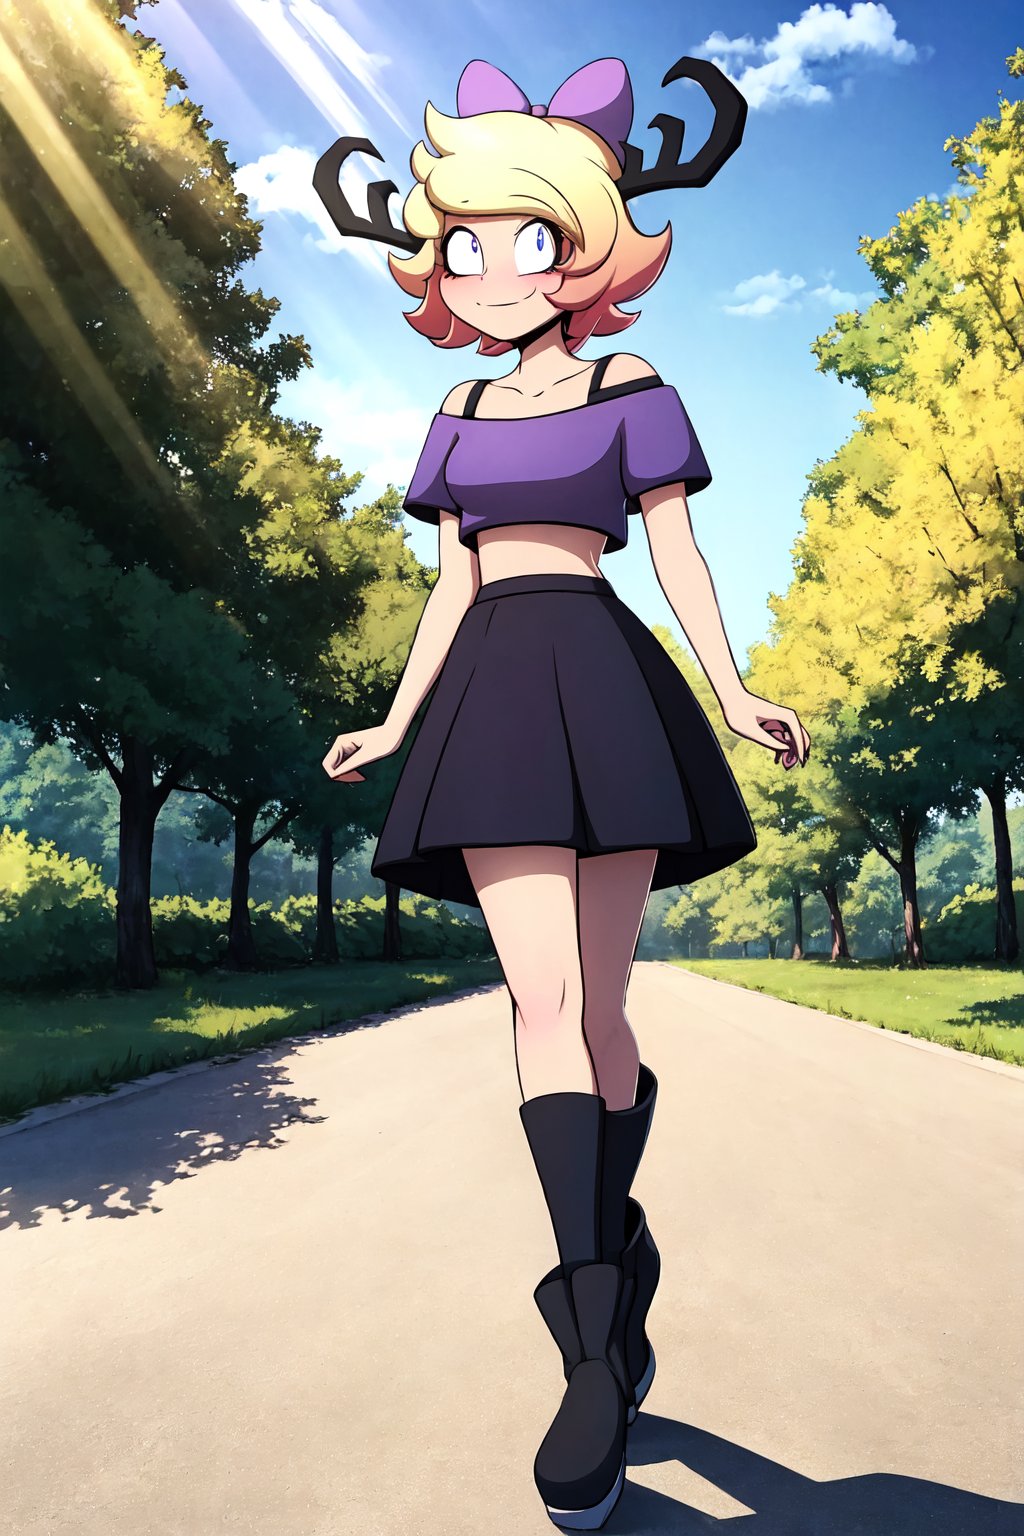 (extremely detailed fine touch:1.2), (natural light, sun light, light rays, dappled light, ray tracing:1.2), masterpiece, best quality, highly quality, SpoopyStories, 
BREAK, 
wendi, 1girl, solo, alone, short hair, yellow hair, gradient hair, antlers on head, purple bow on head, purple eyes, :), smile, closed mouth, crop top, magenta shirt, off-shoulder_shirt, magenta skirt, long stockings, strip stockings, black boots, standing, arms_at_sides, looking at viewer, walking, full body, dynamic angle, (centered), 
BREAK, 
outdoor, park, trees, (sunny day), (blue sky), complex_background, detailed background